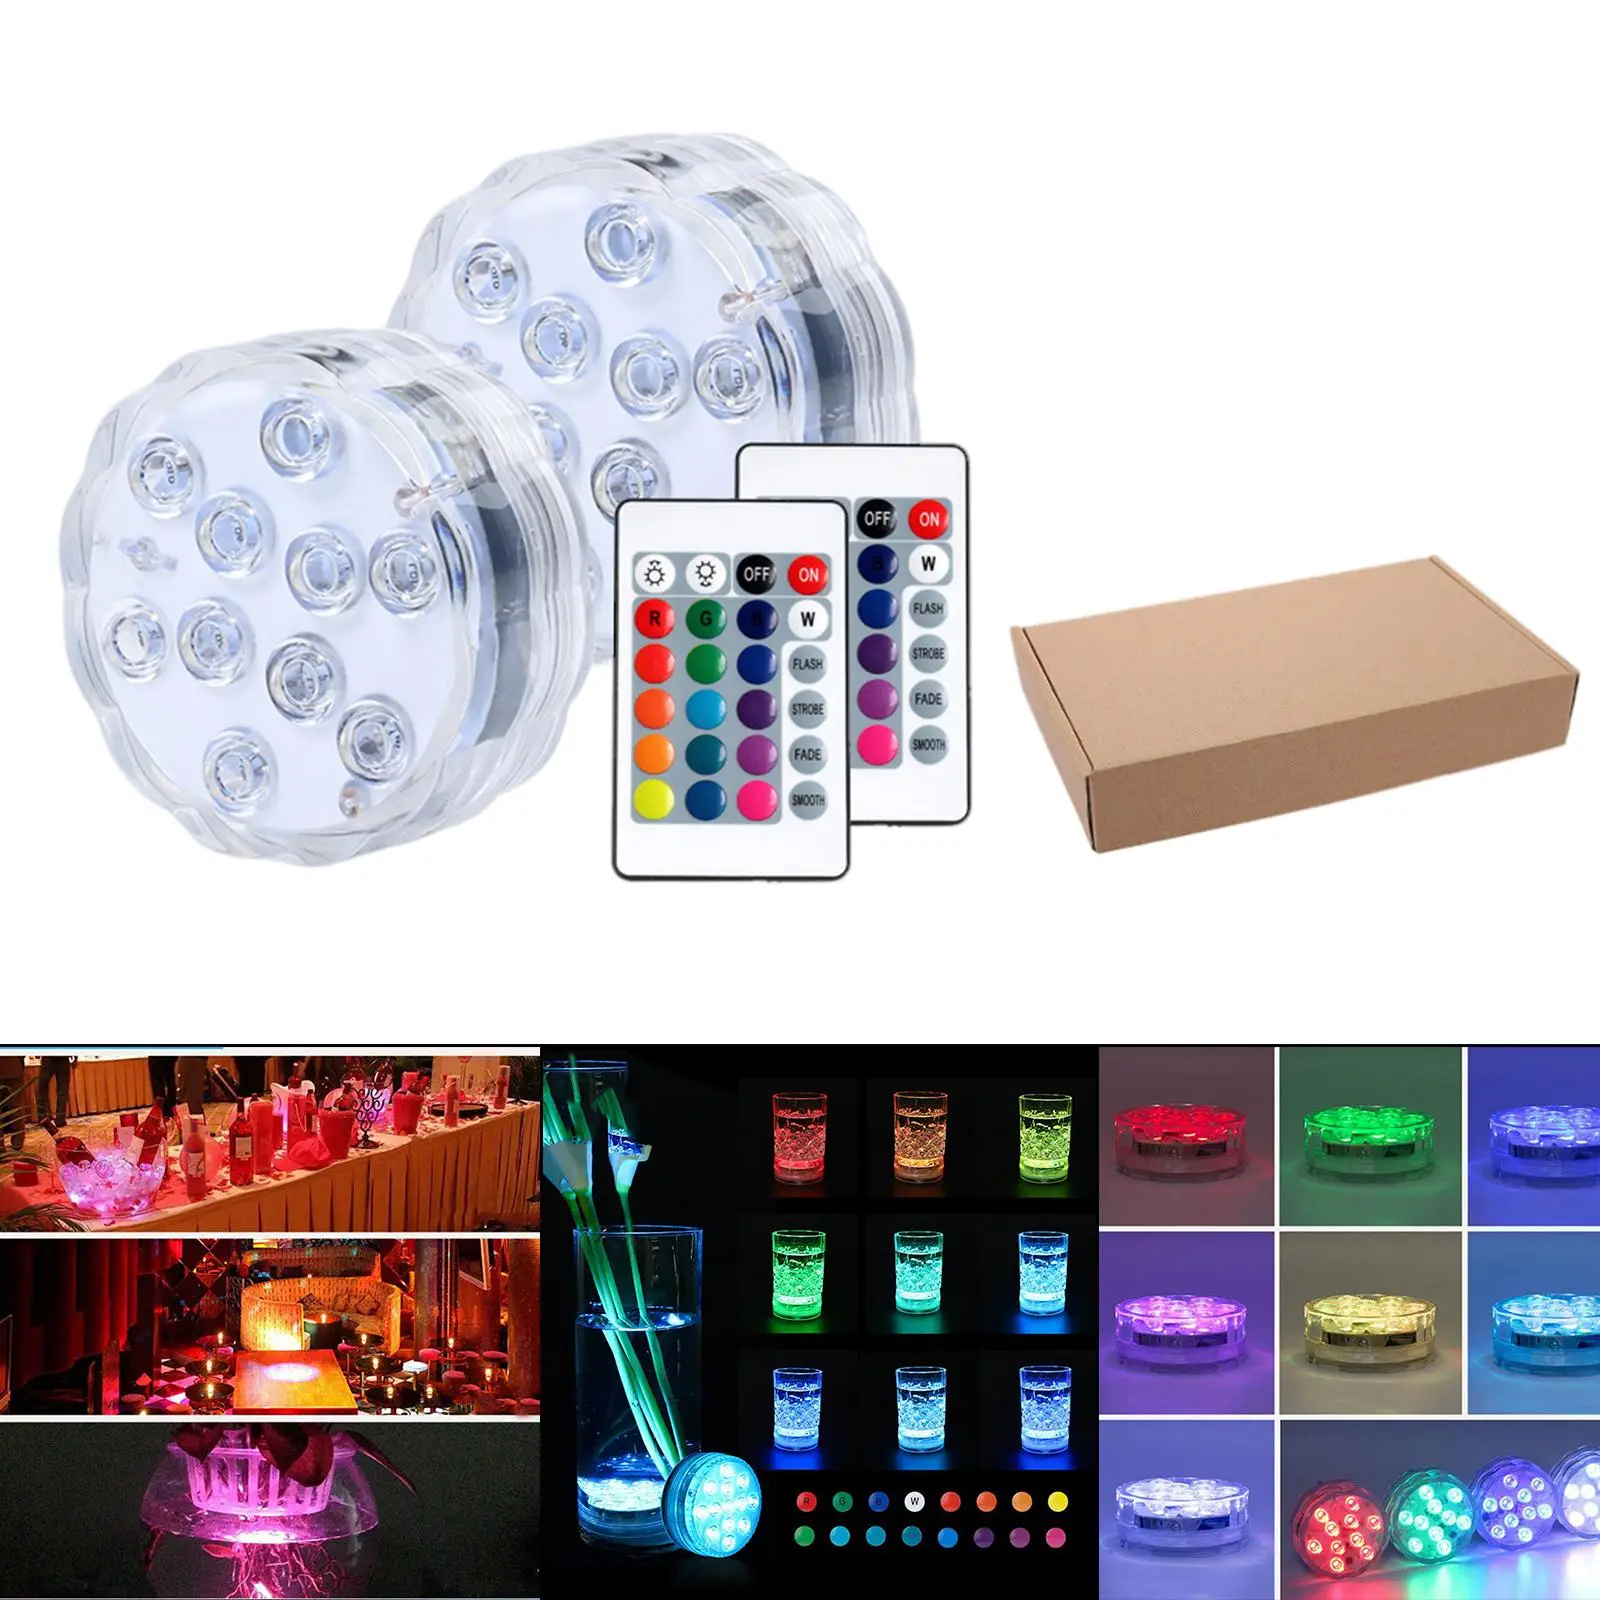 10 RGB Submersible LED Lights Pools Pond  Lights with Suction Cup